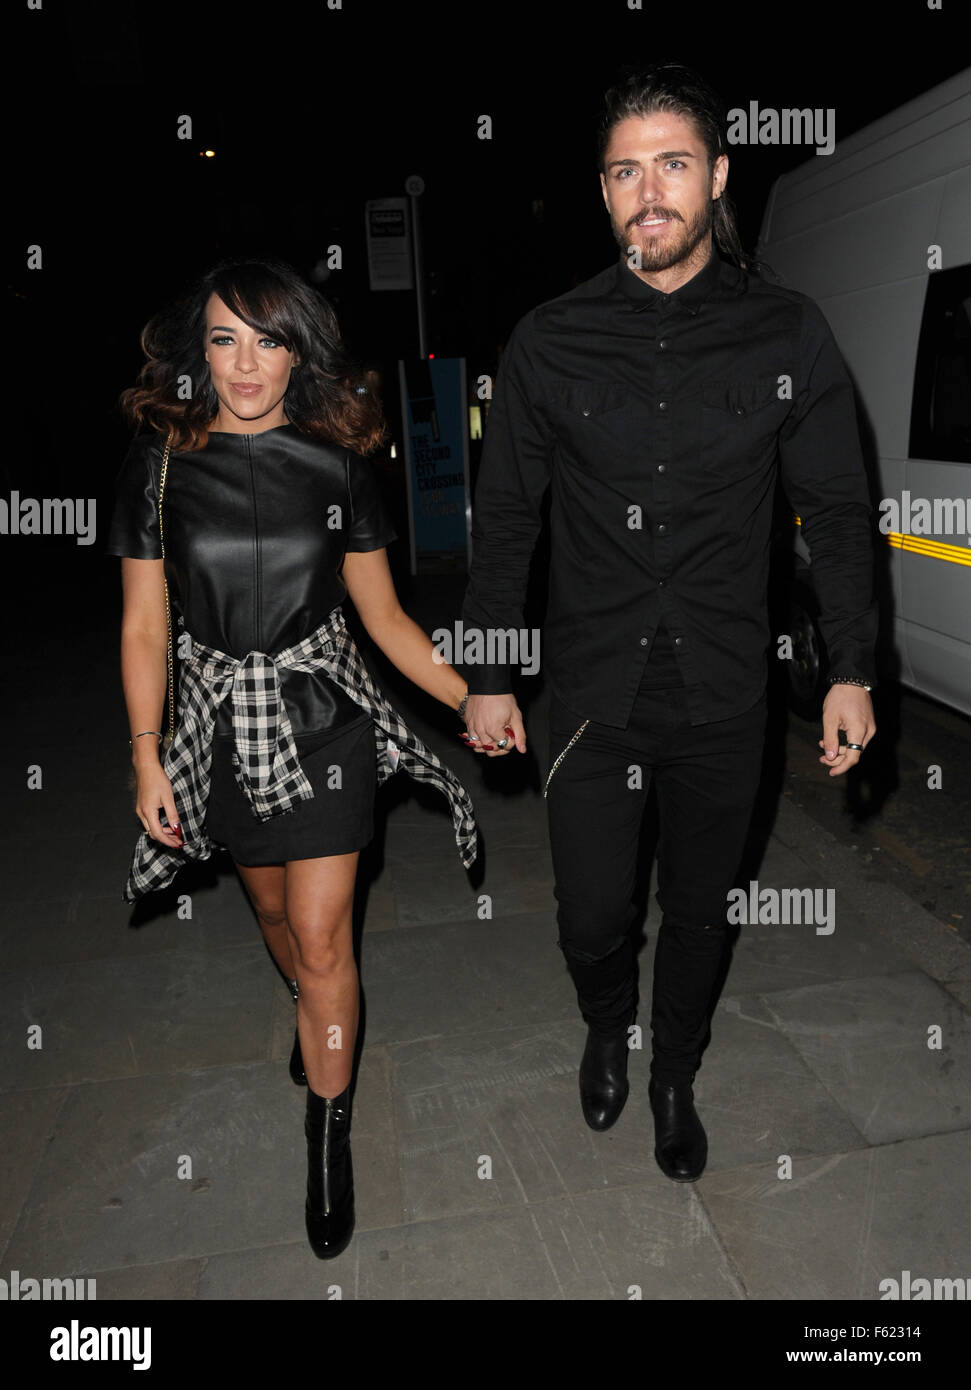 Celebs Attending The Belstaff Store Launch On King Street In Manchester  Featuring: Steph Davis, Sam Reece Where: Manchester, United Kingdom When:  01 Oct 2015 Stock Photo - Alamy